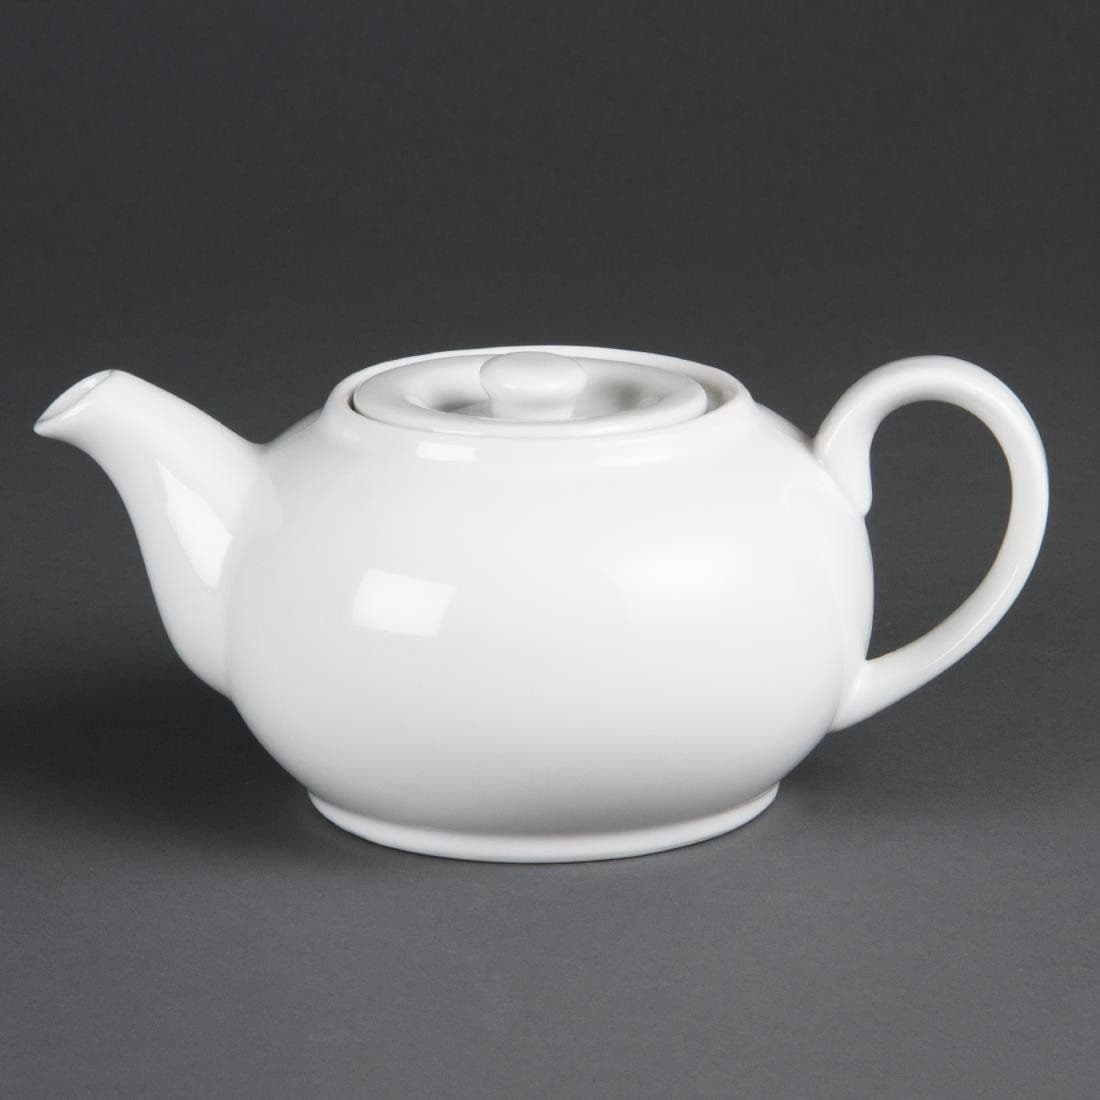 CB474 Olympia Whiteware Teapots 852ml (Pack of 4) JD Catering Equipment Solutions Ltd